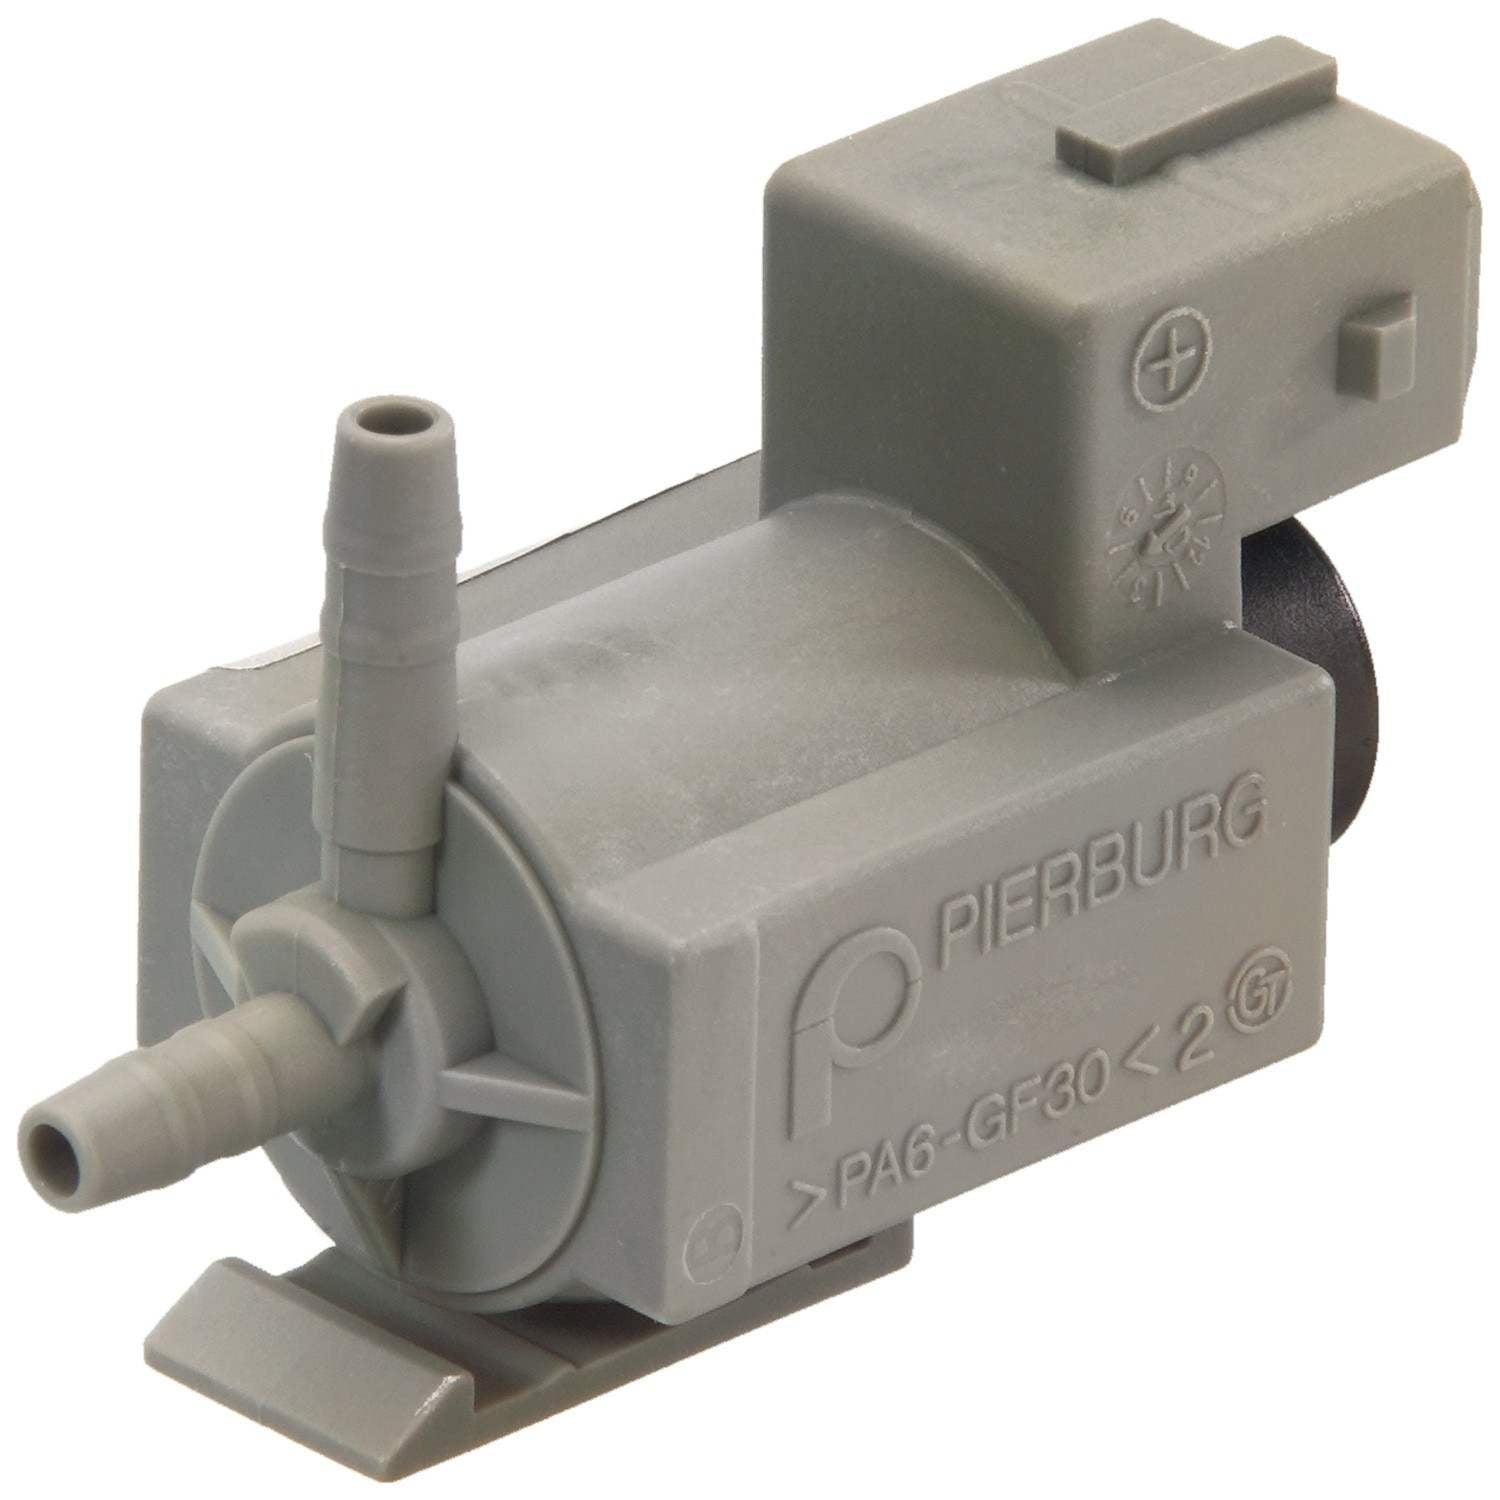 Pierburg distributed by Hella Electronic Air Intake Change Over Valve 7.22280.02.0